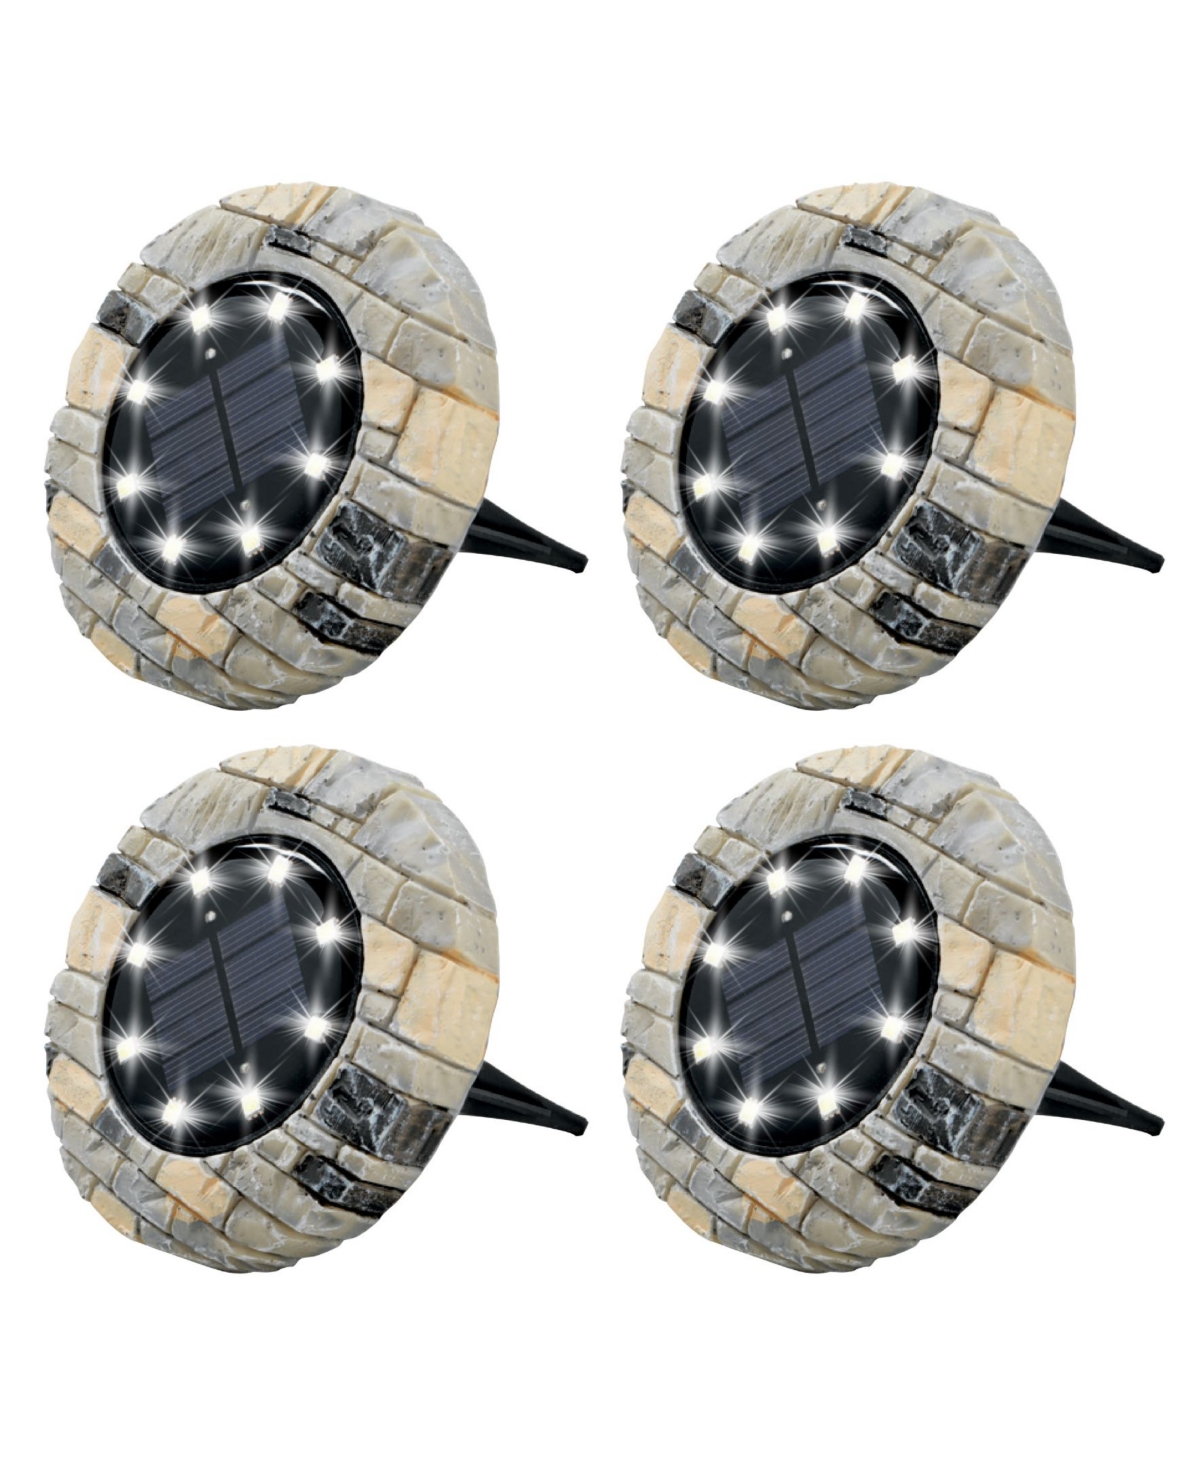 BELL + HOWELL SOLAR POWERED 8 INTEGRATED LED SUPER BRIGHT IN-GROUND STONE LIKE PATH DISK LIGHTS, SET OF 4